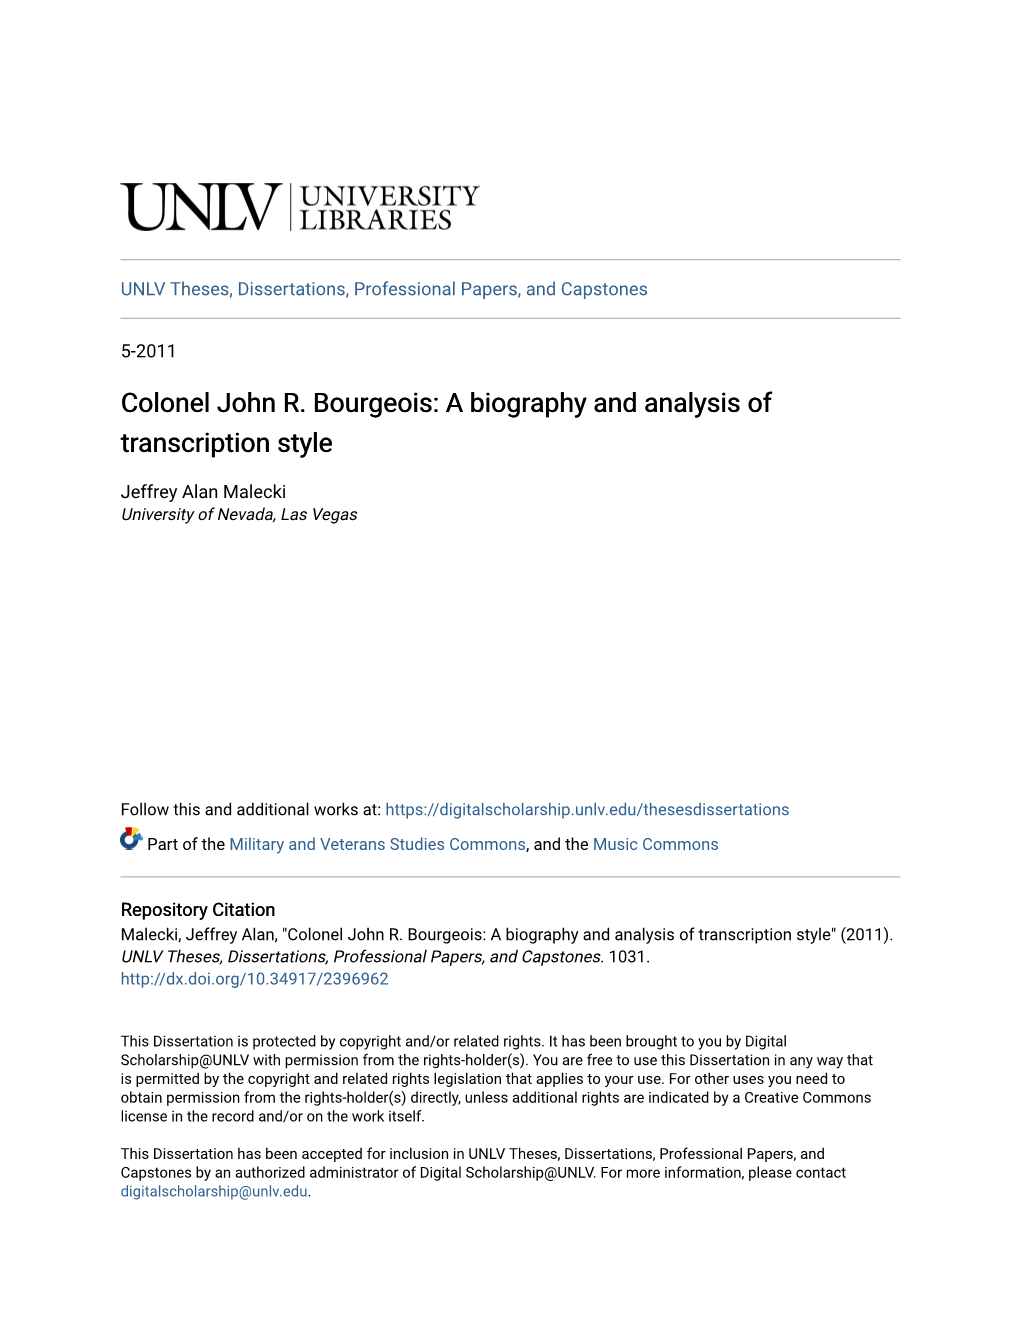 Colonel John R. Bourgeois: a Biography and Analysis of Transcription Style